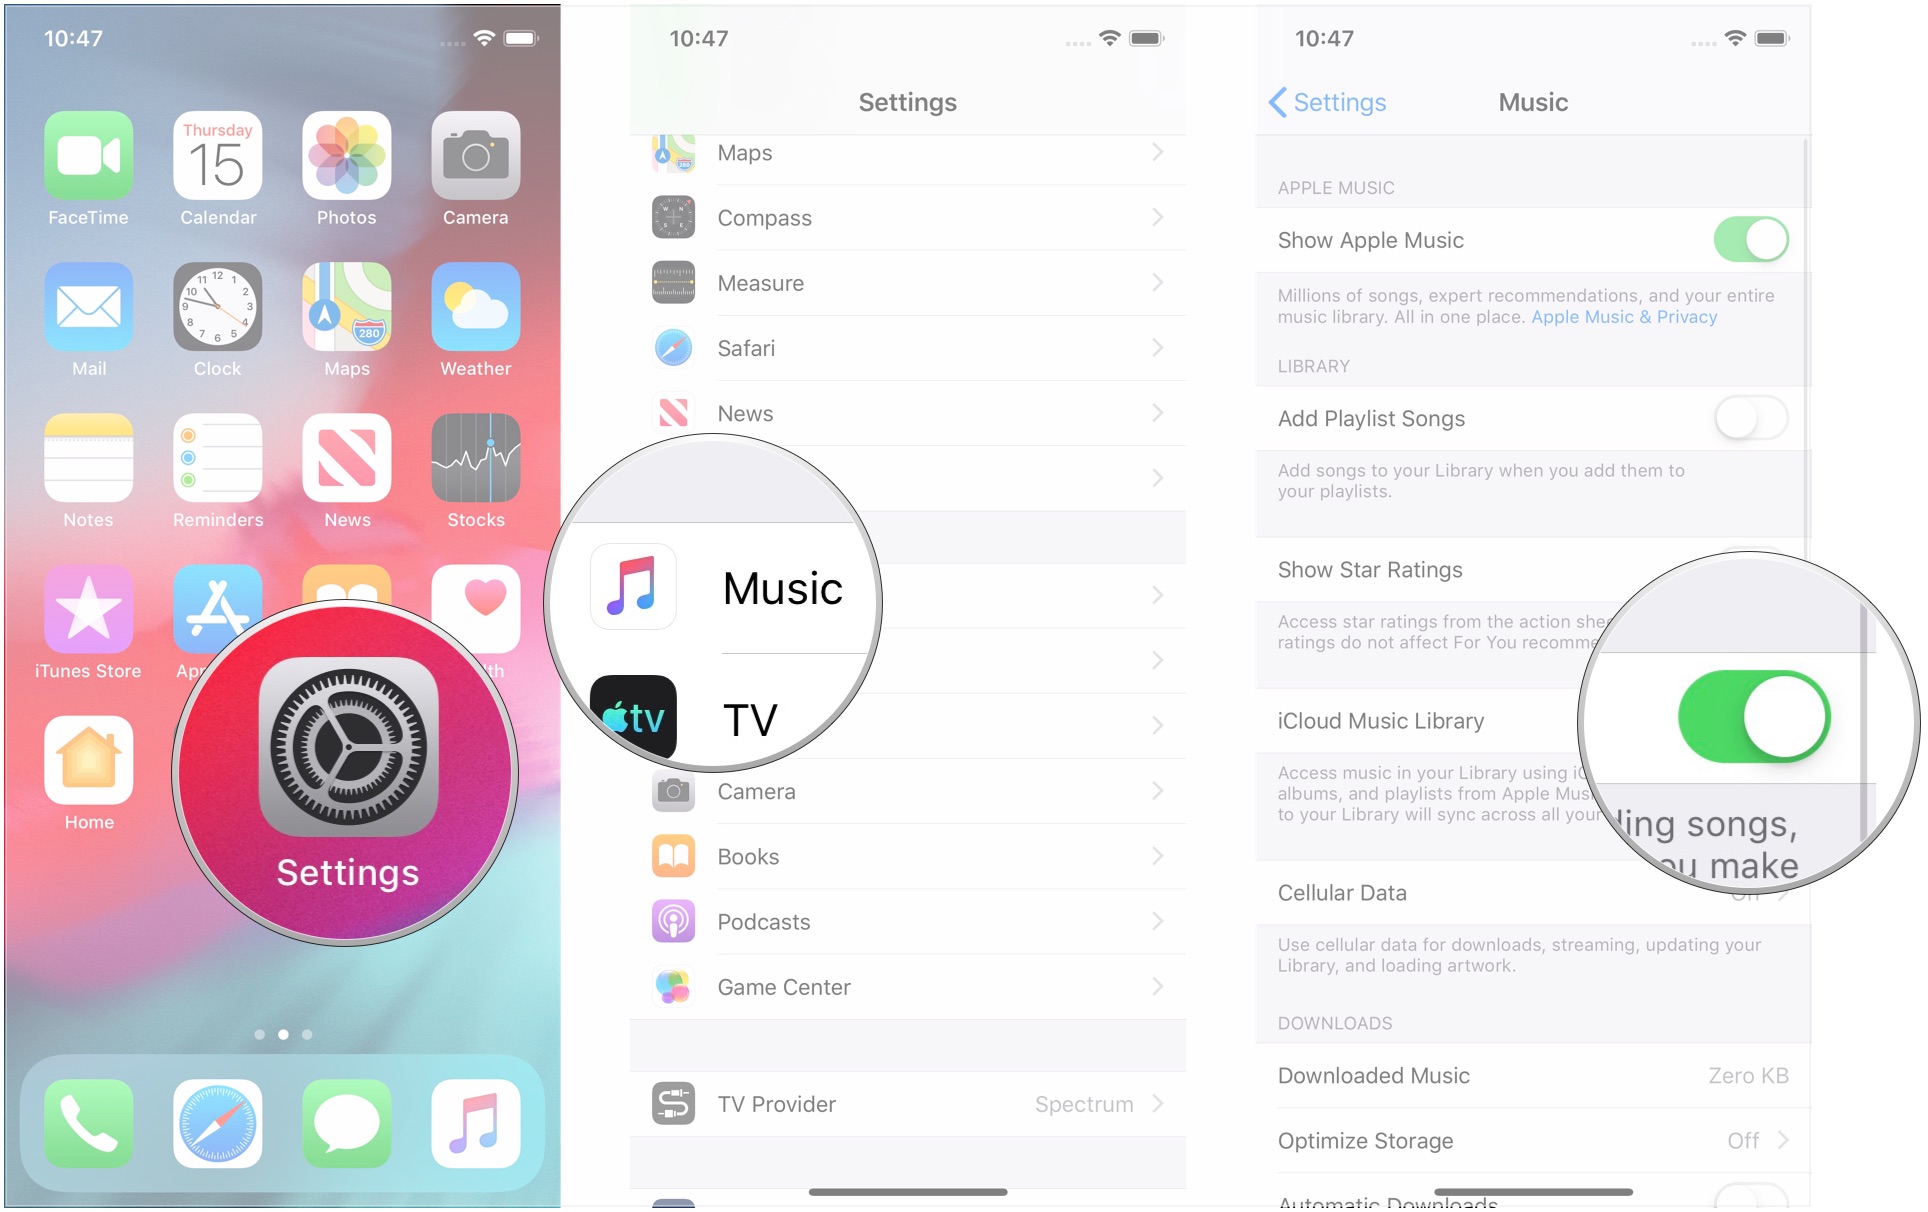 Open Settings, tap Music, tap the iCloud Music Library switch